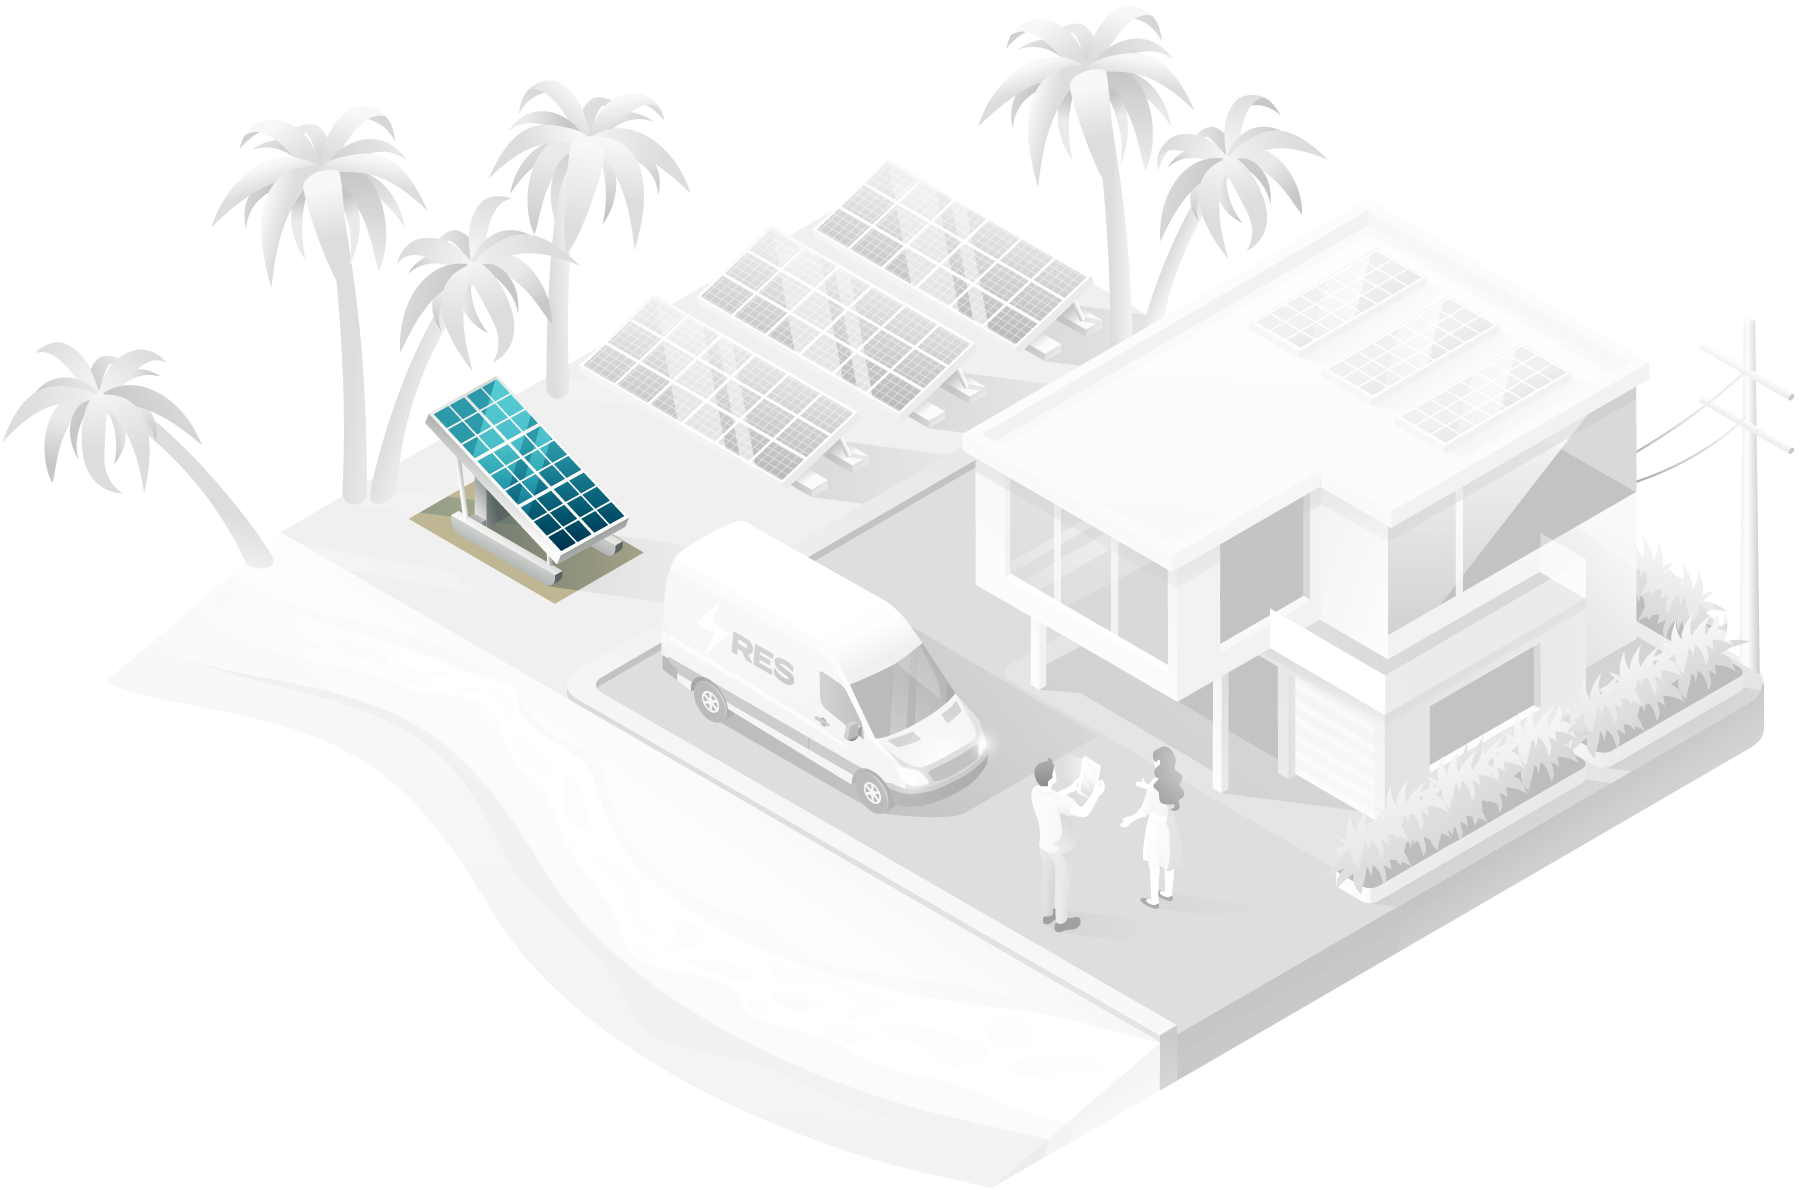 RES Mobile Power Solar PV systems